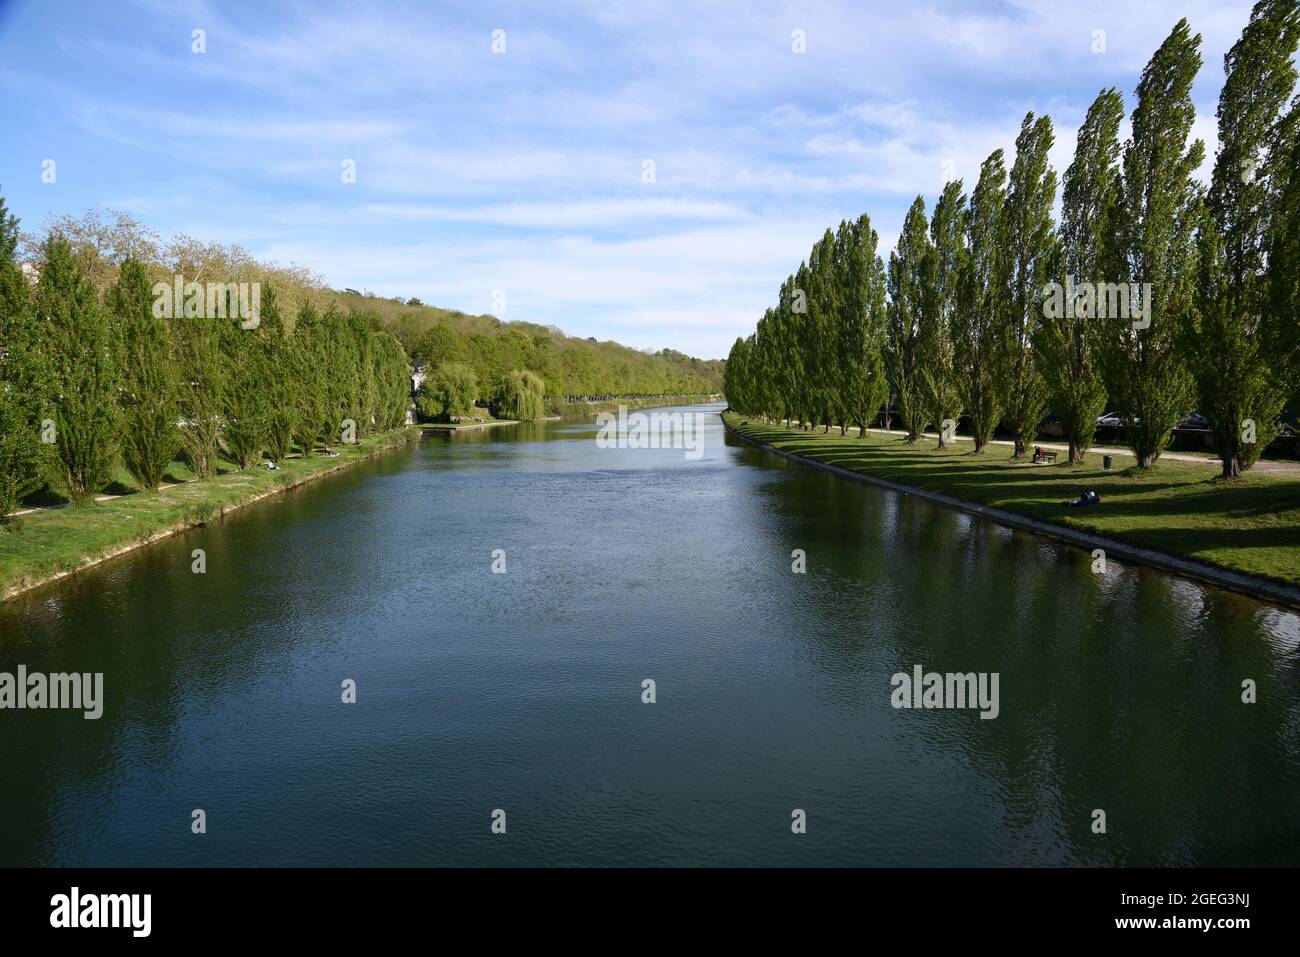 Melun (Paris area): banks of the River Seine and poplars Stock Photo